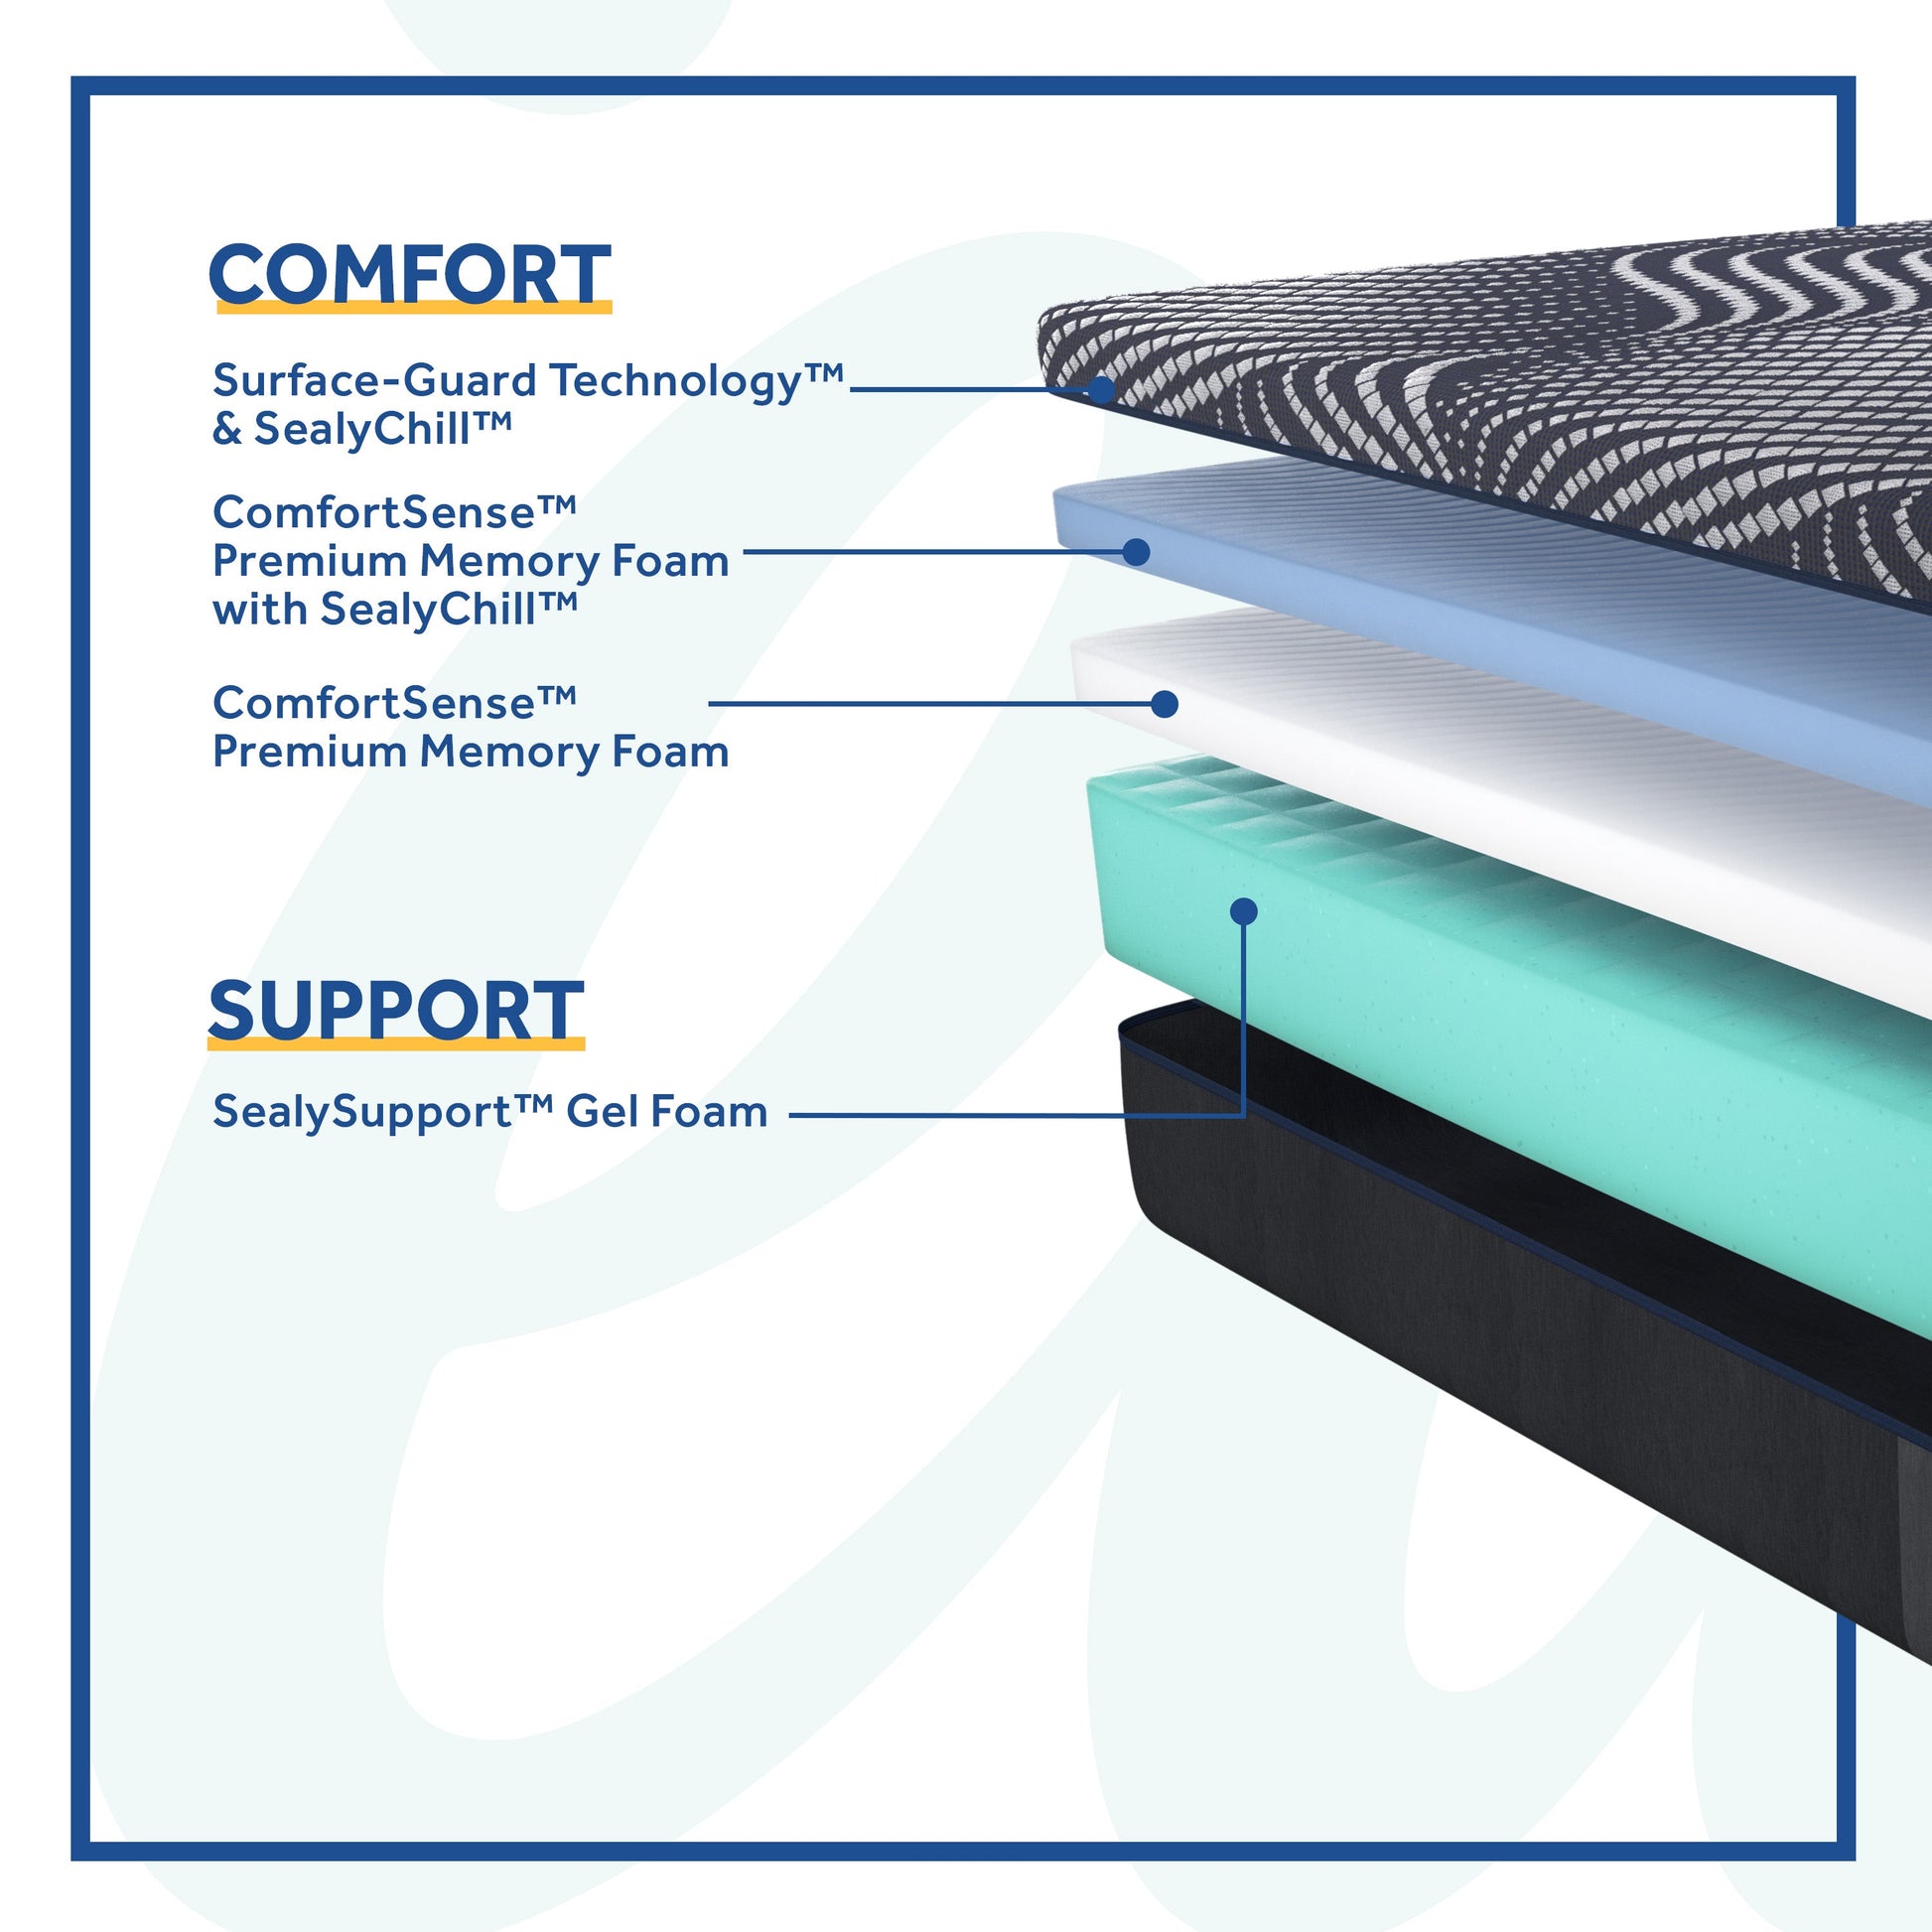 Sealy High Point Ultra Soft Mattress Comfort and Support Layers